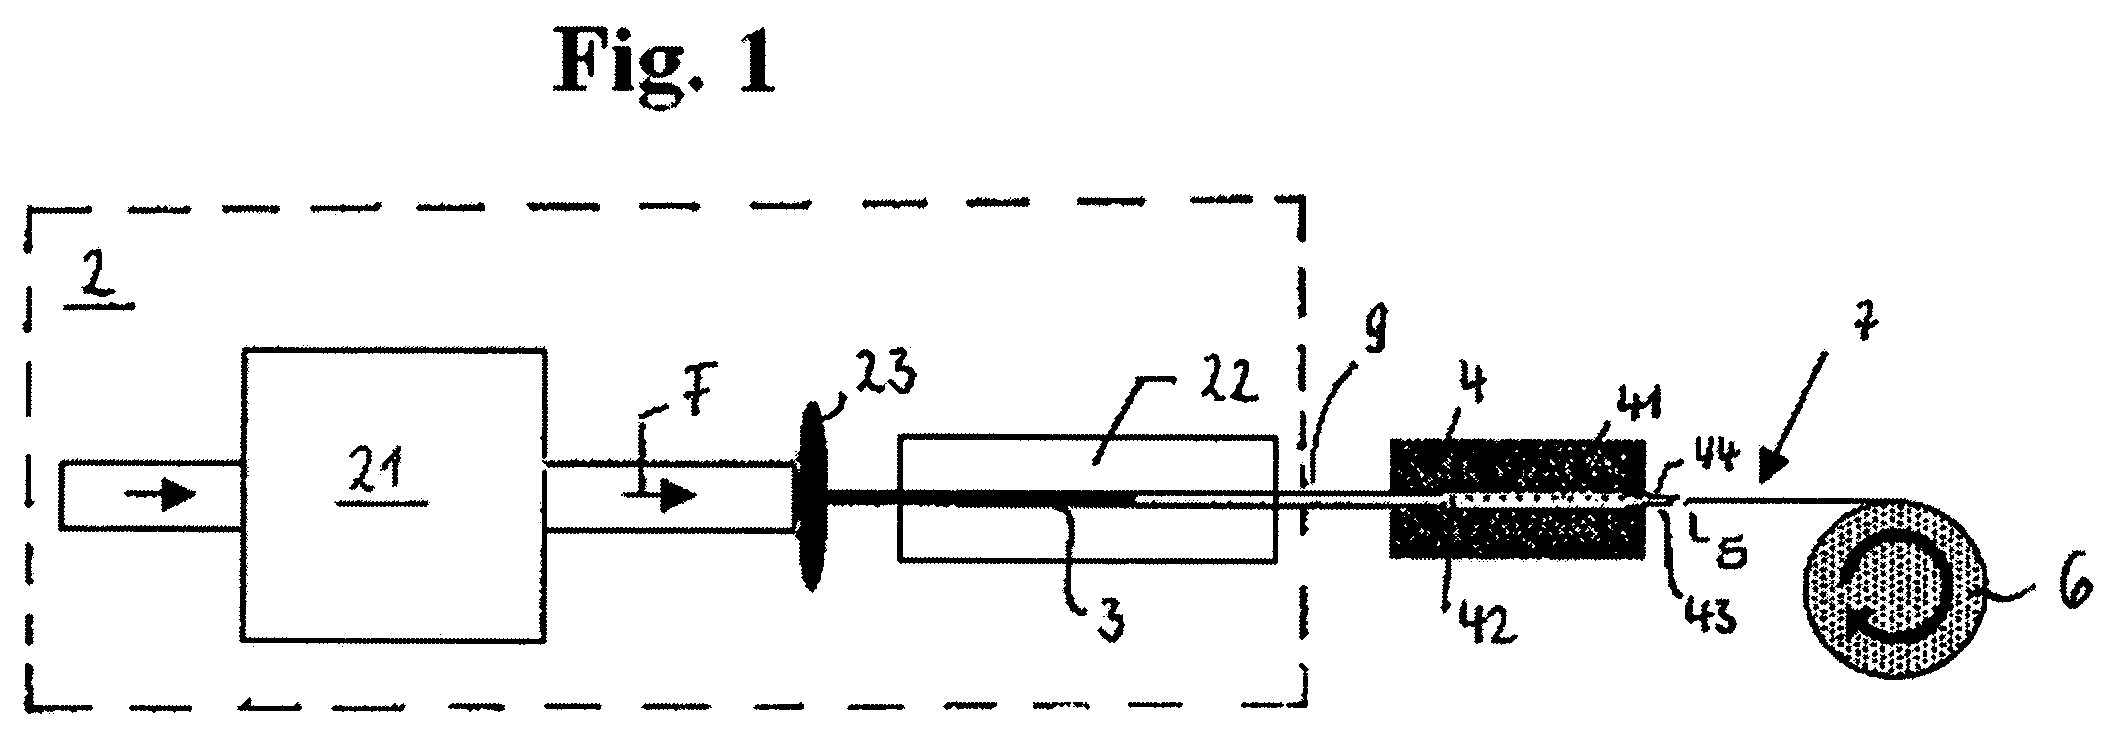 Method and device for producing a thread from silk proteins